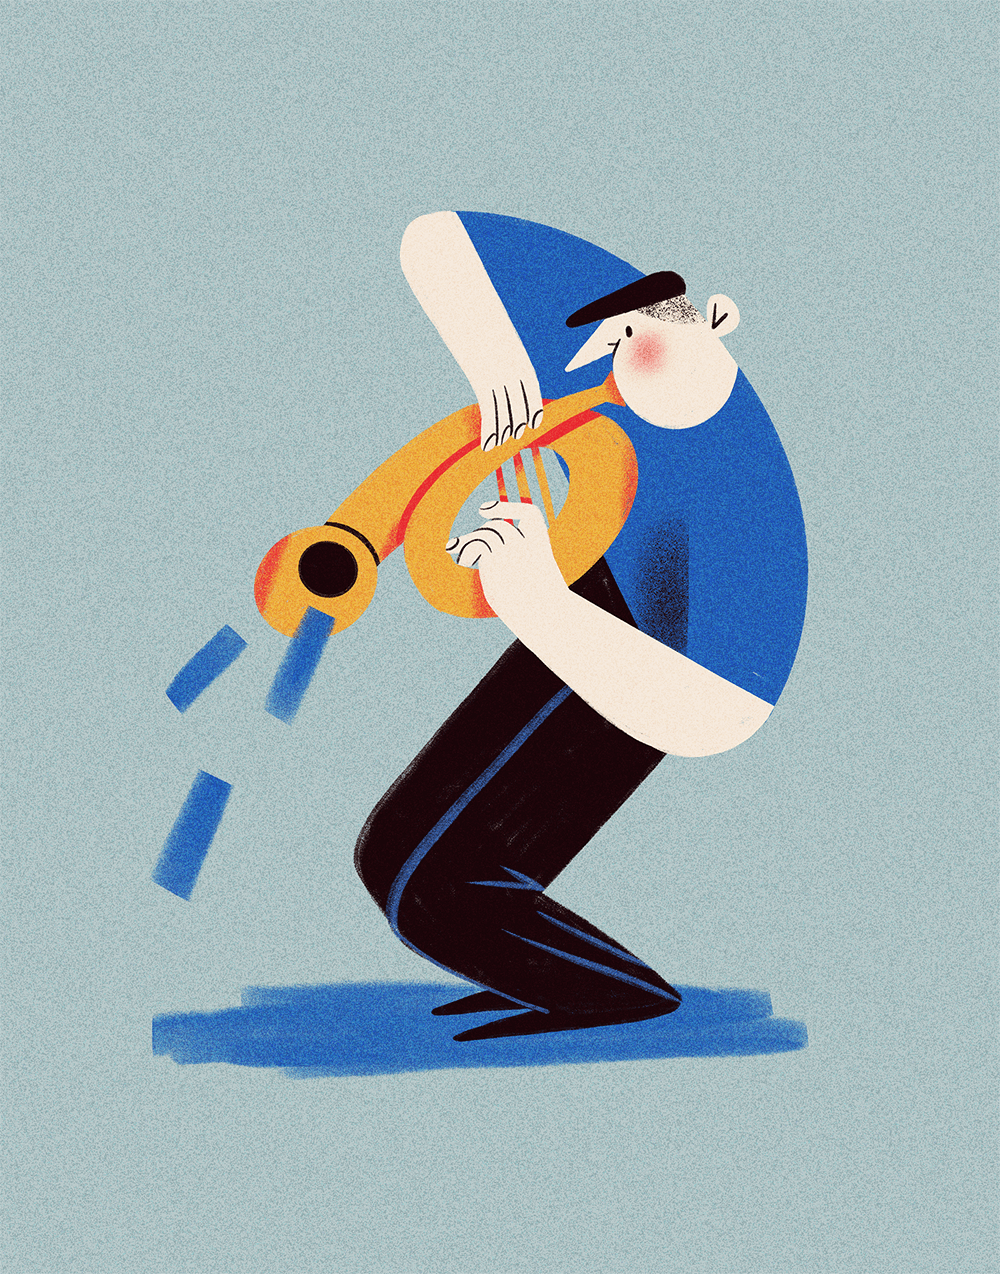 jazz trumpet music star goal Editorial Illustration conceptual Character design  band